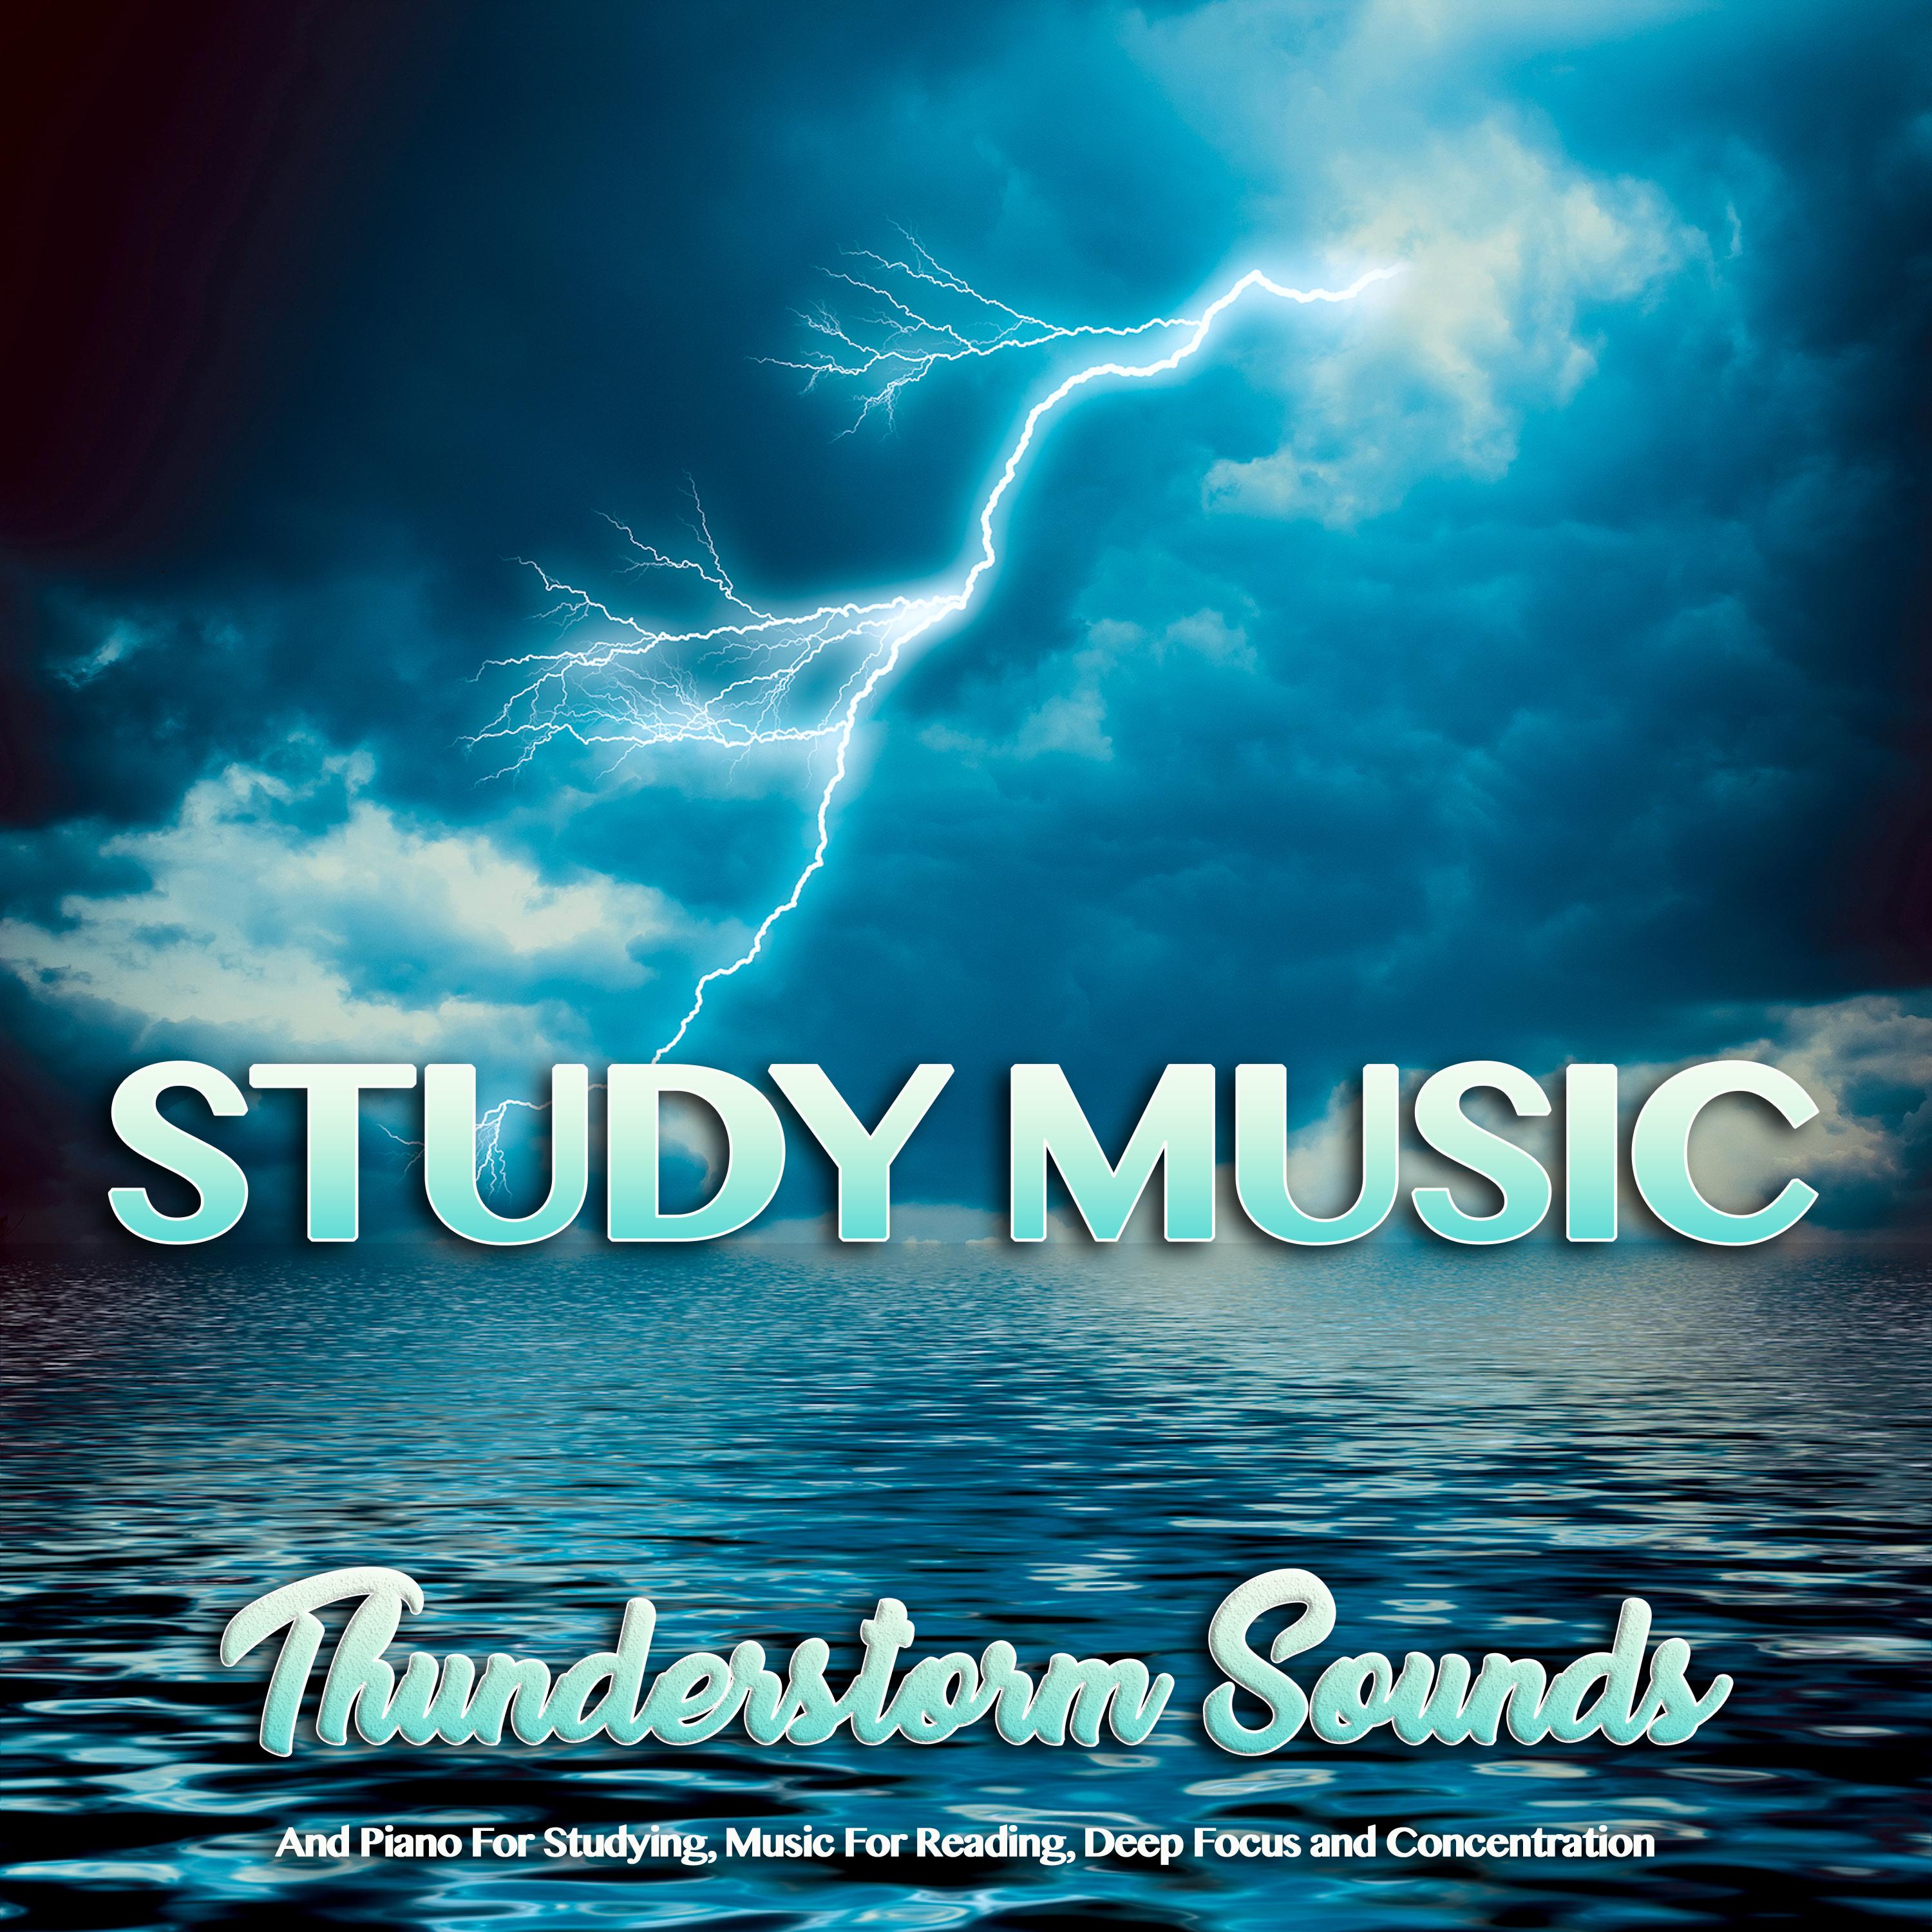 Music For Concentration and Thunderstorm Sounds